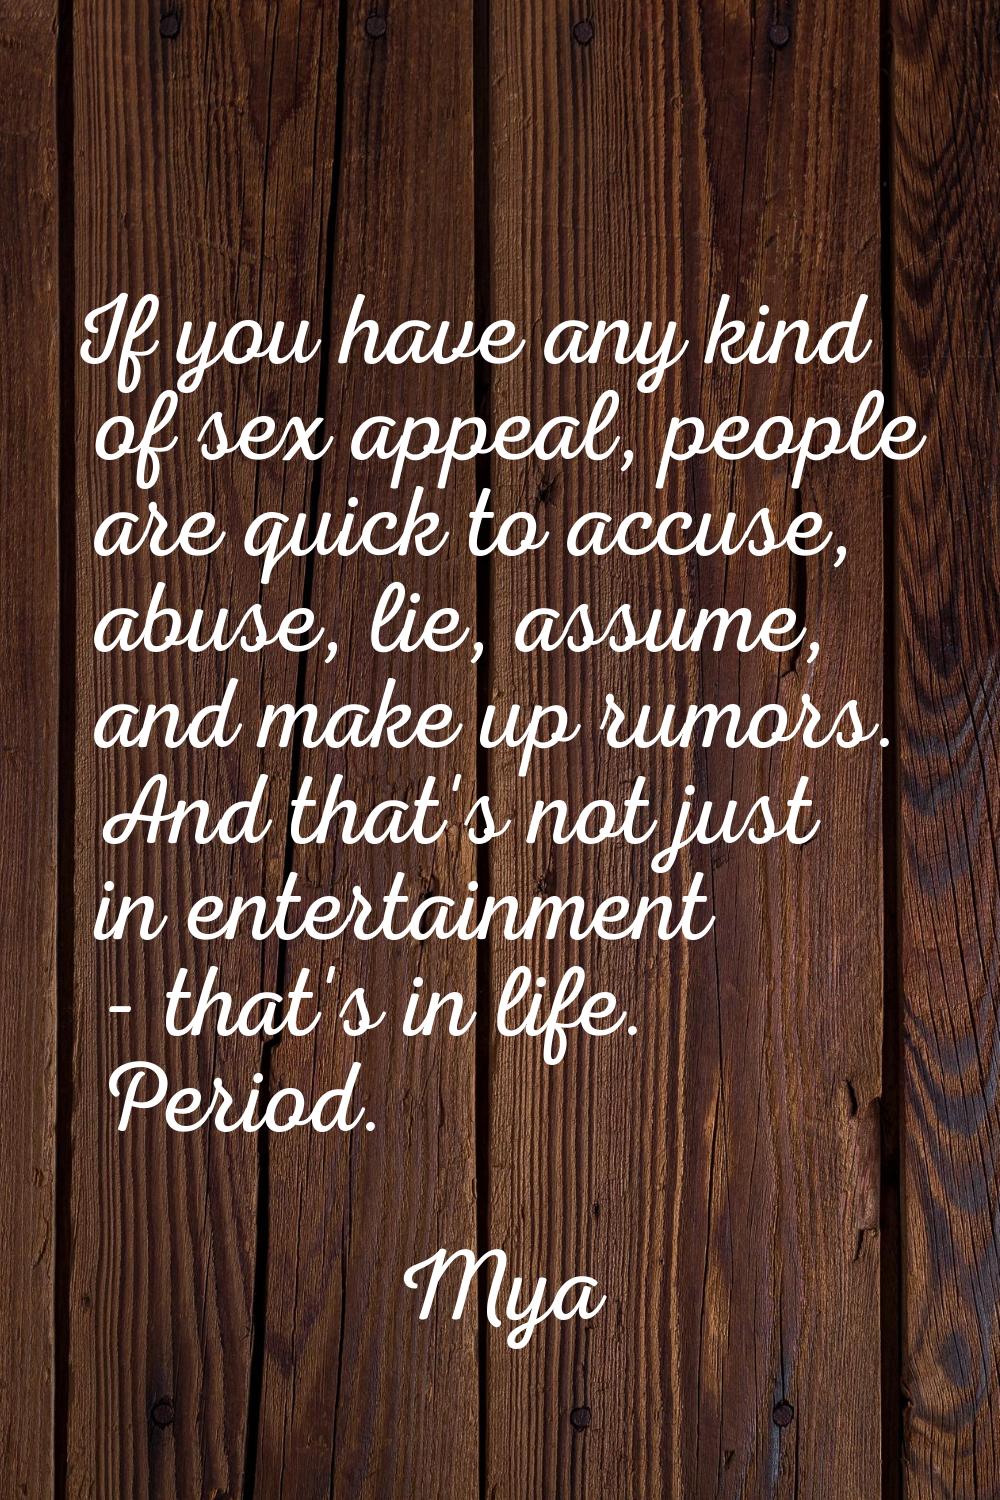 If you have any kind of sex appeal, people are quick to accuse, abuse, lie, assume, and make up rum